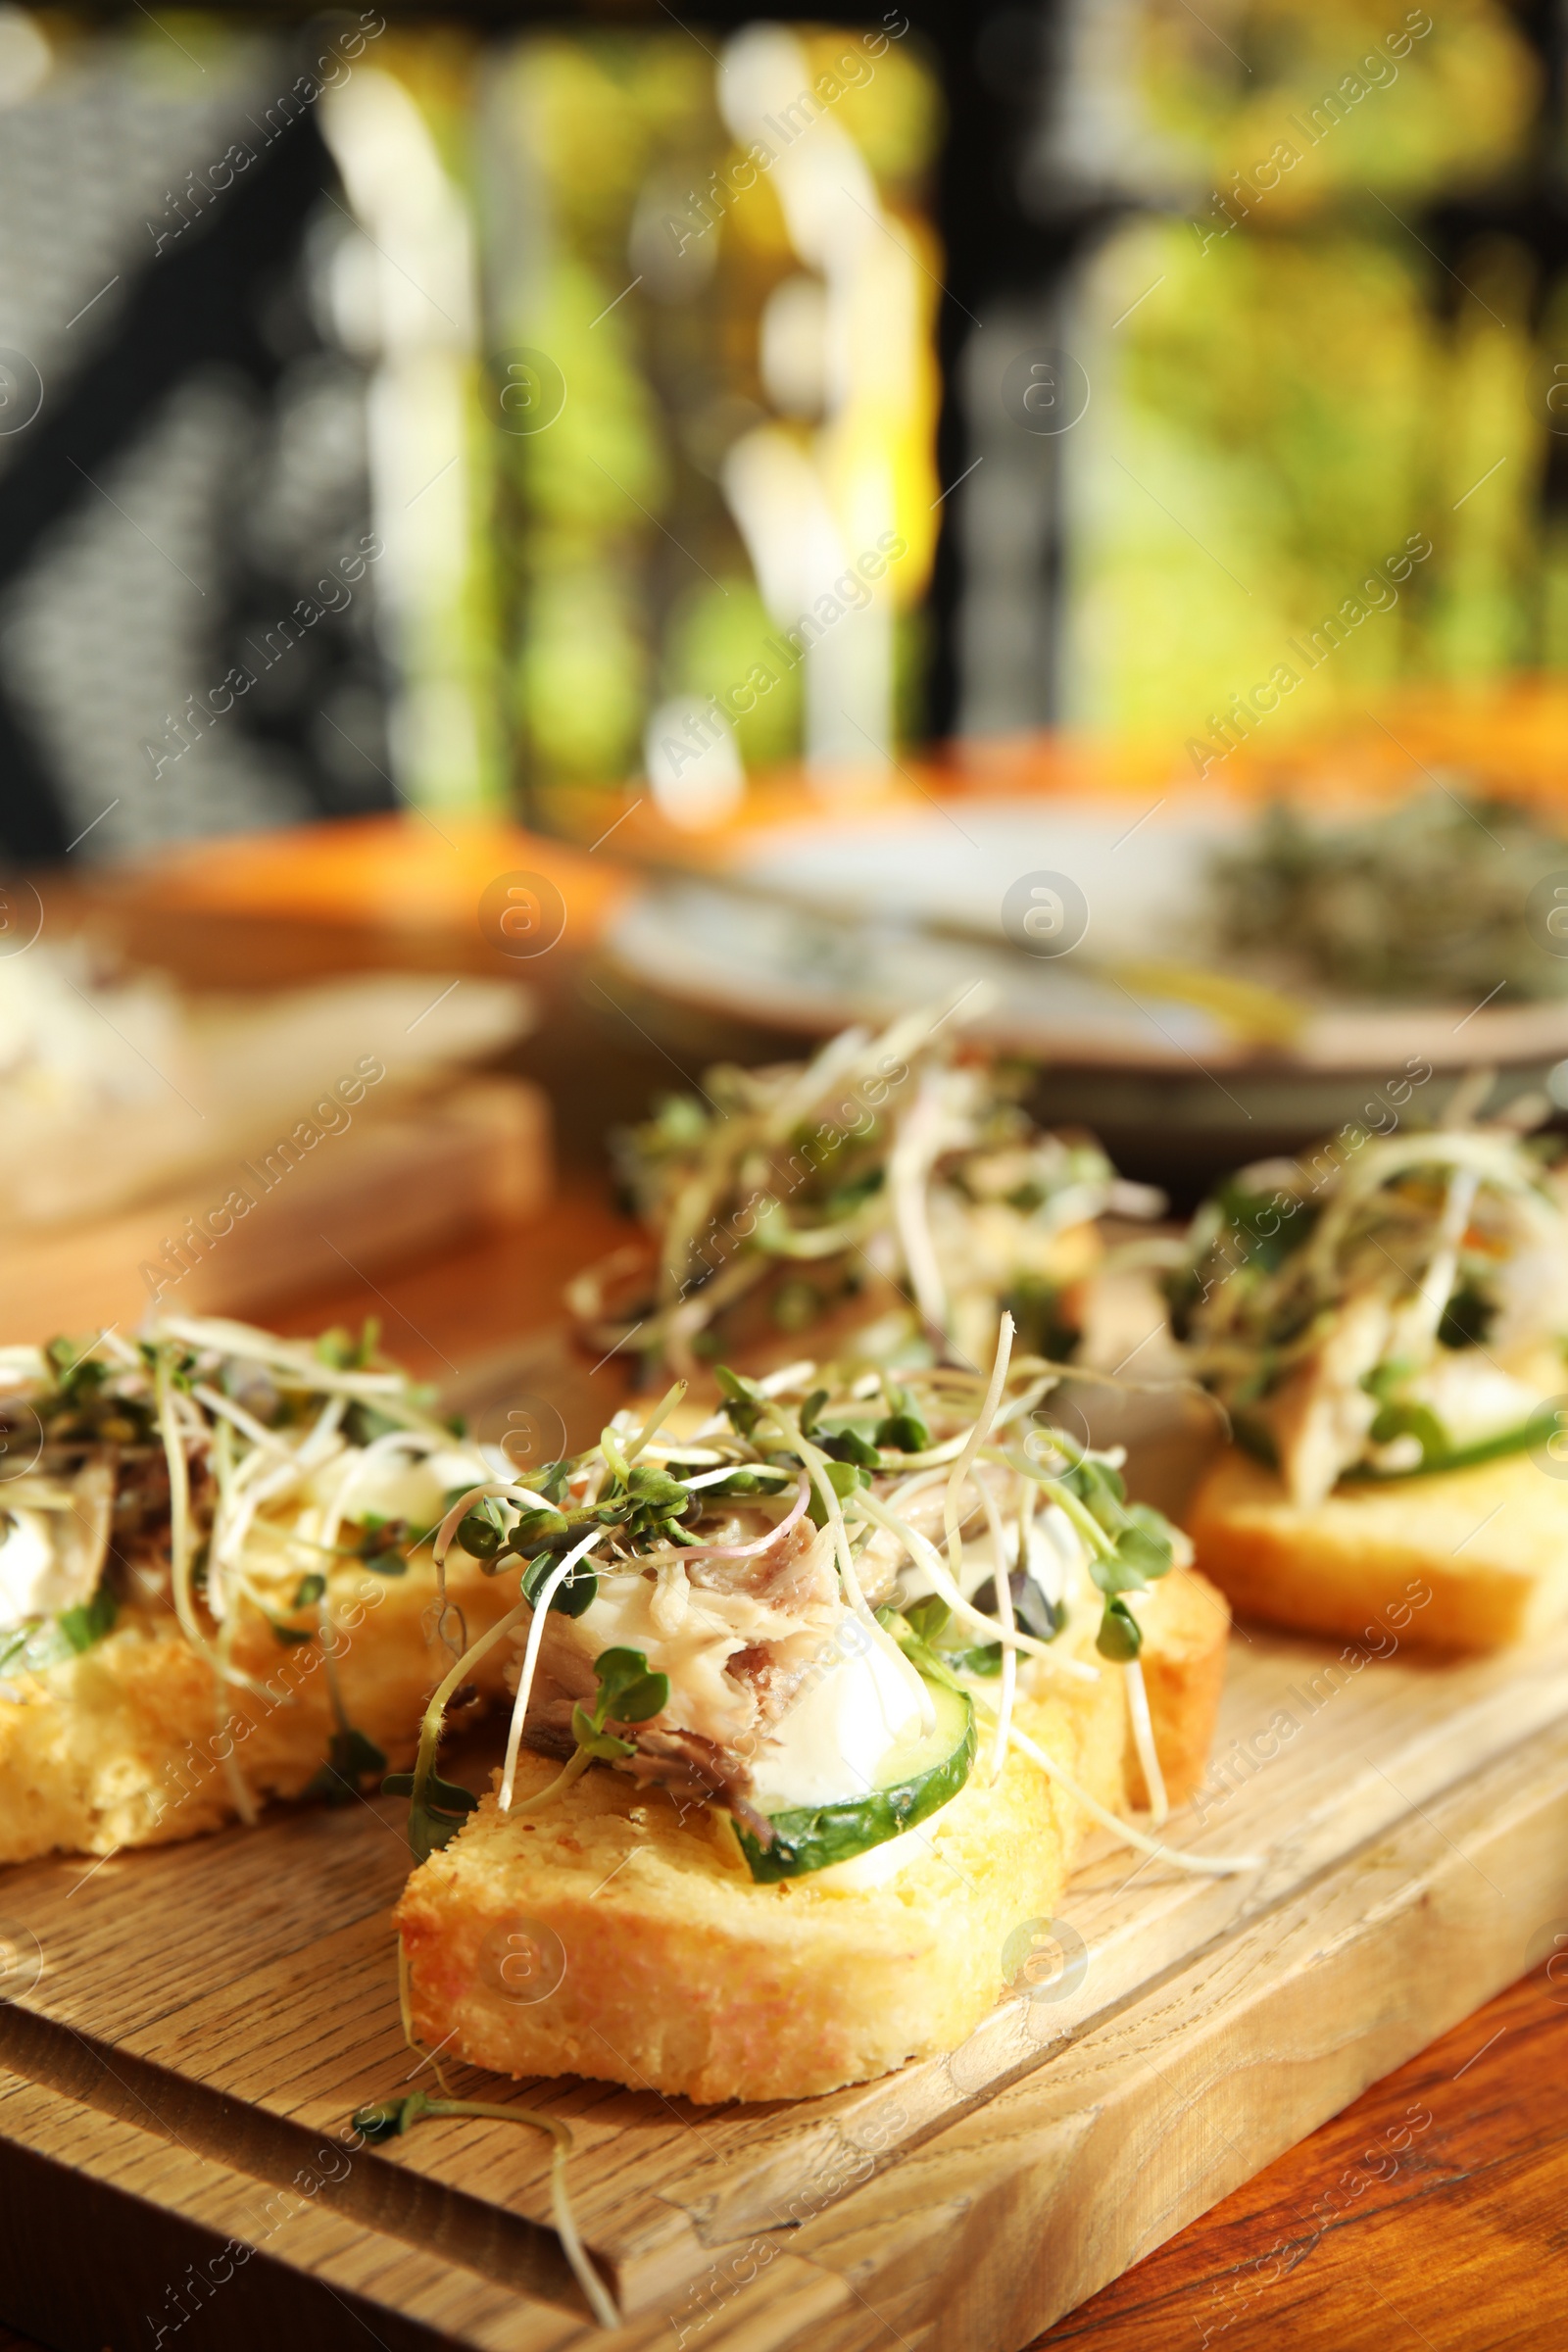 Photo of Delicious bruschettas with fish on wooden table